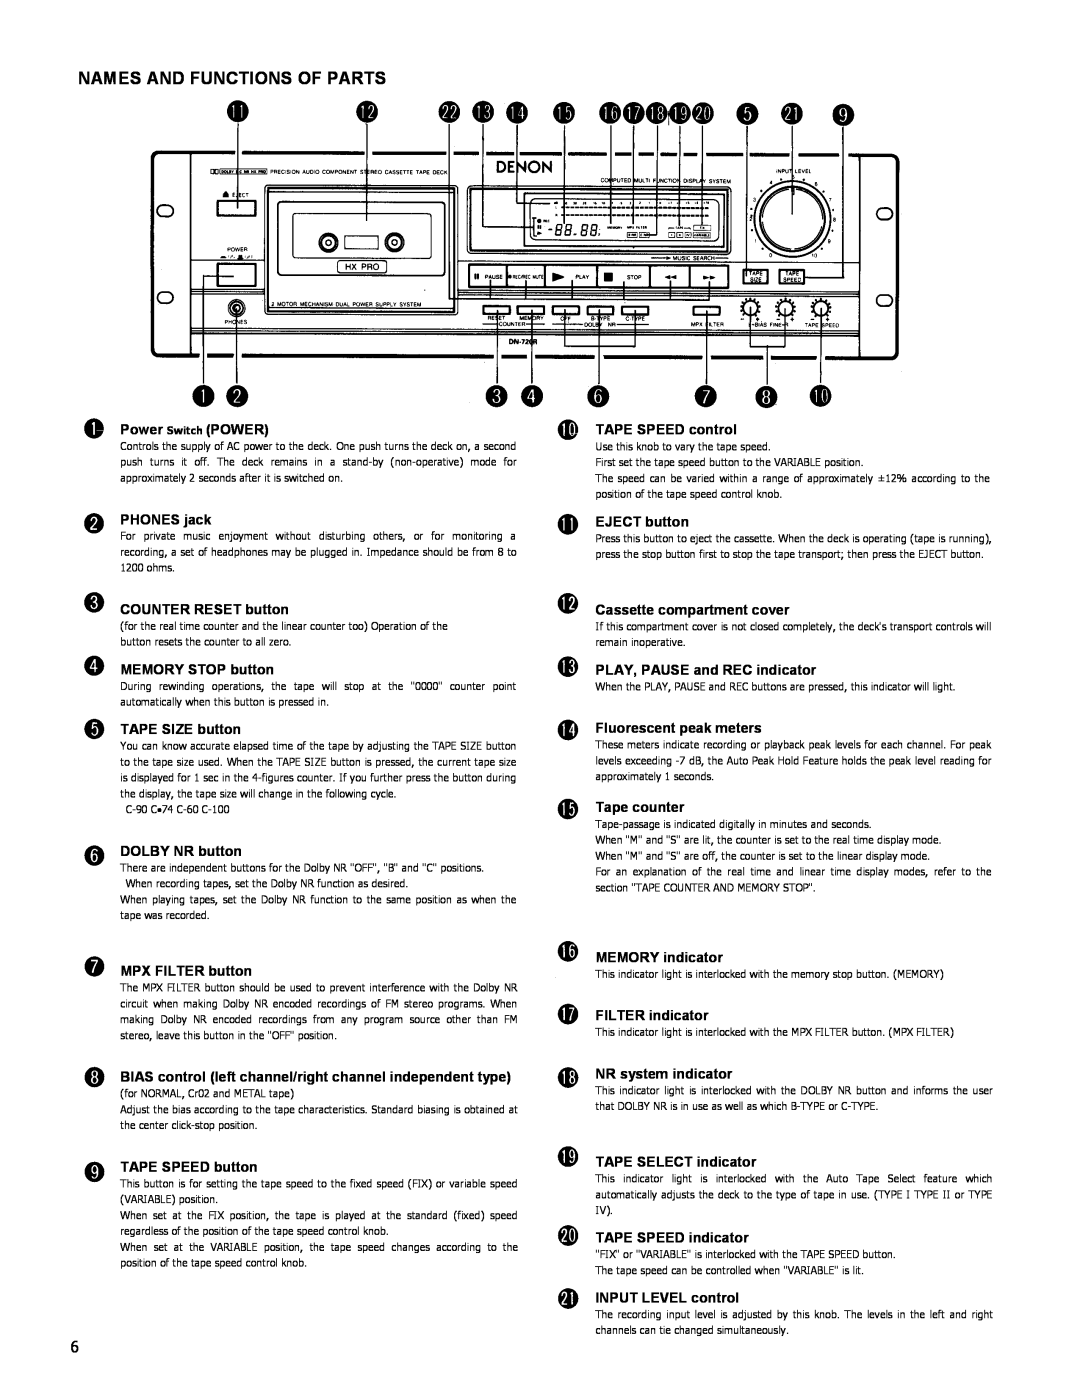 Denon DN-720R operating instructions Names And Functions Of Parts 